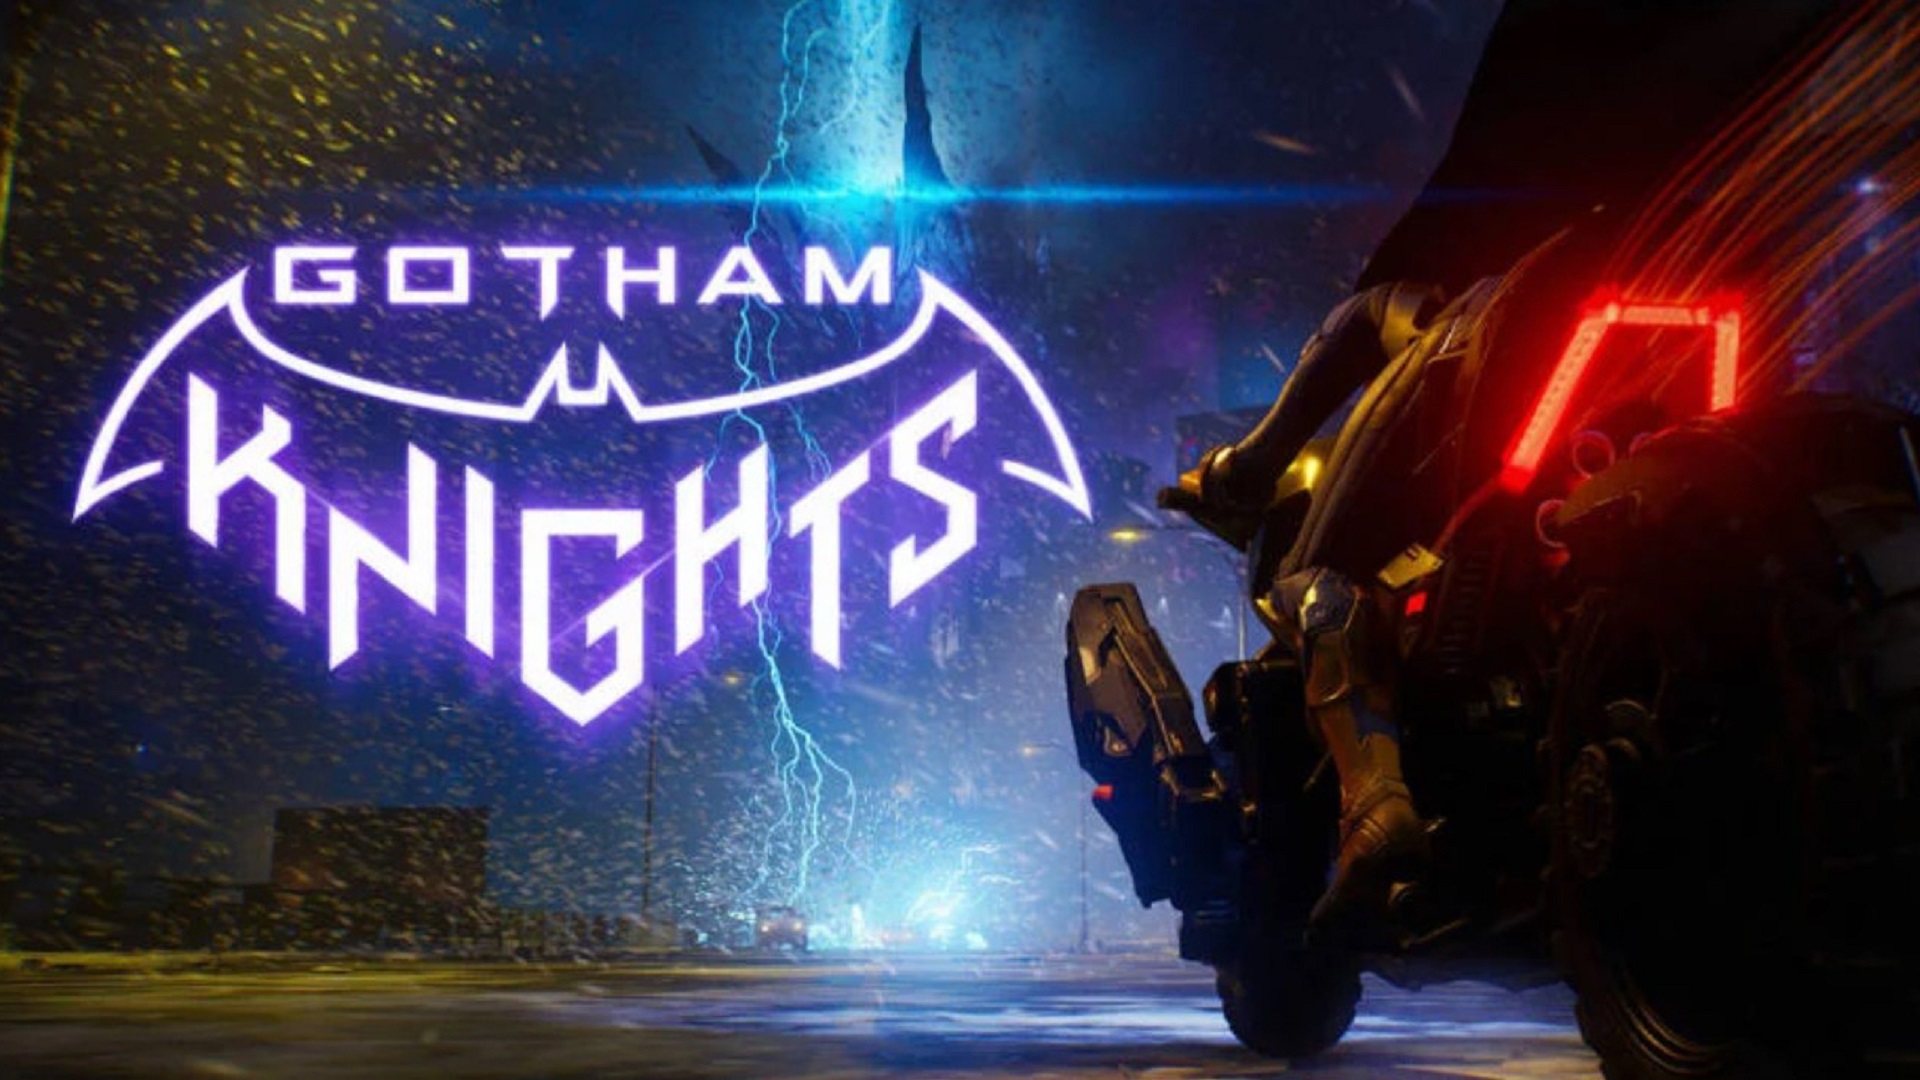 Gotham Knights Combat Has Range Of Combo Options, Will Be “comfortable” For Modern Third Person Action Fans